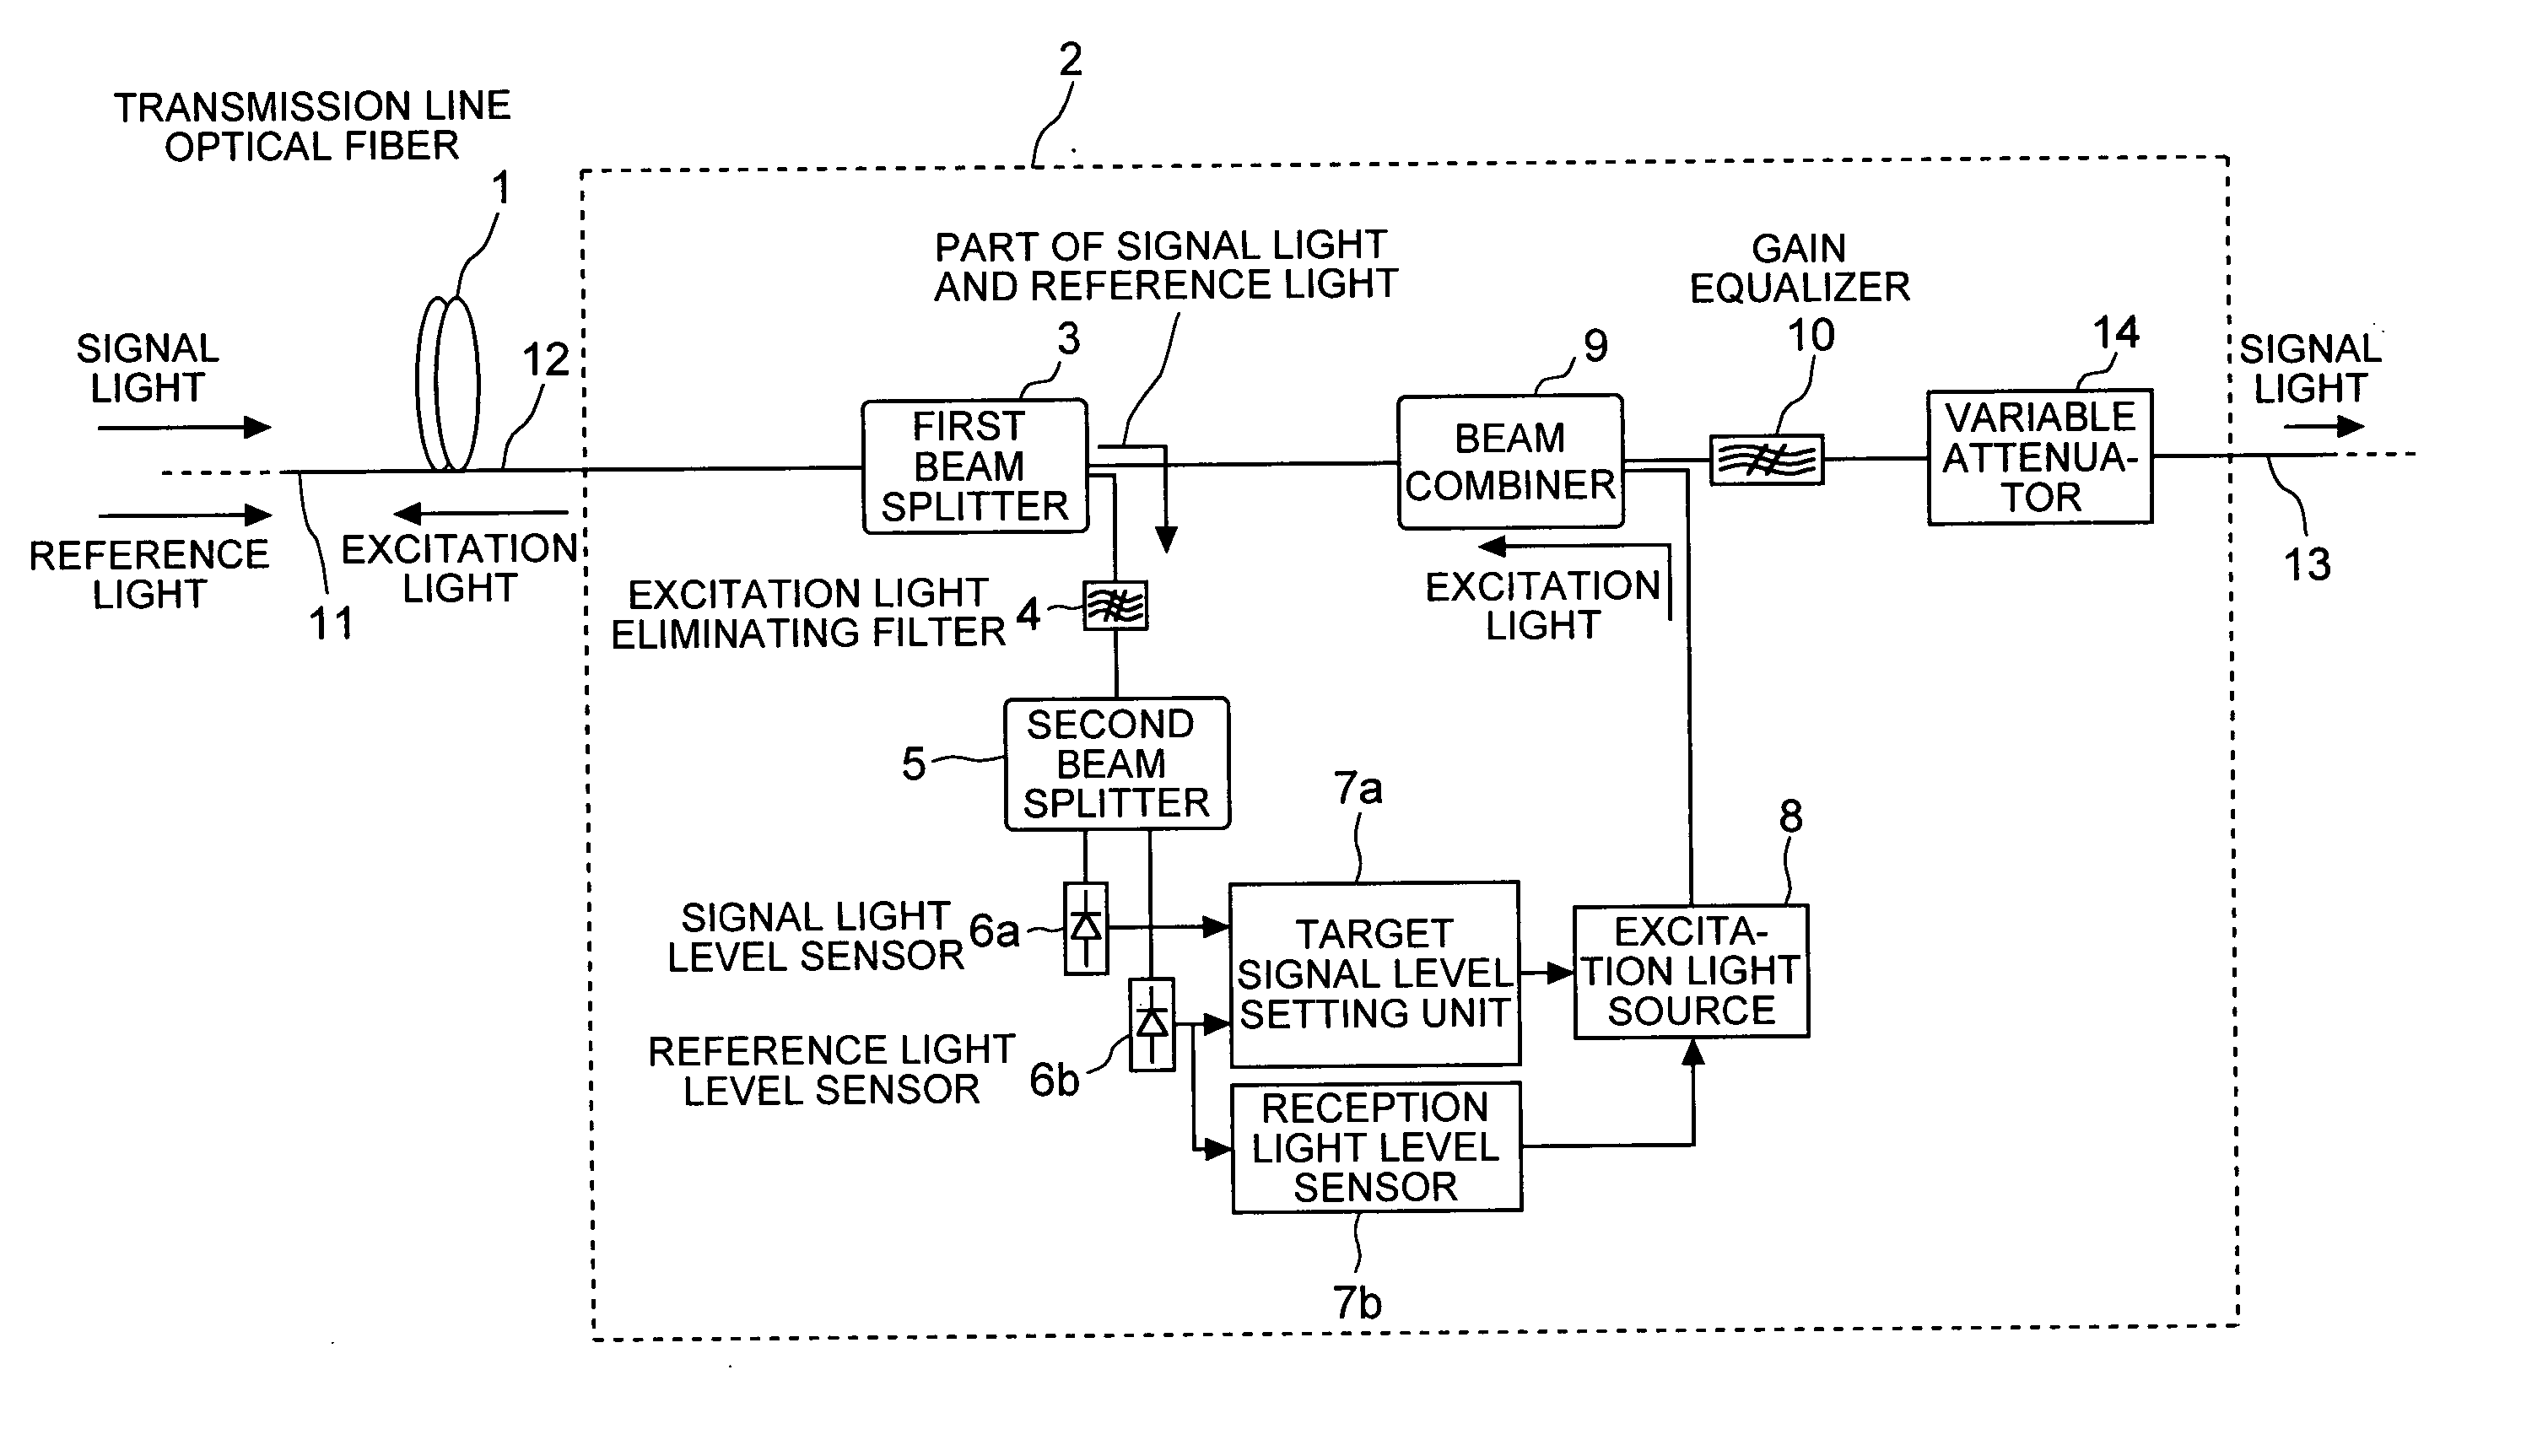 Raman amplifier and optical relay transmission system